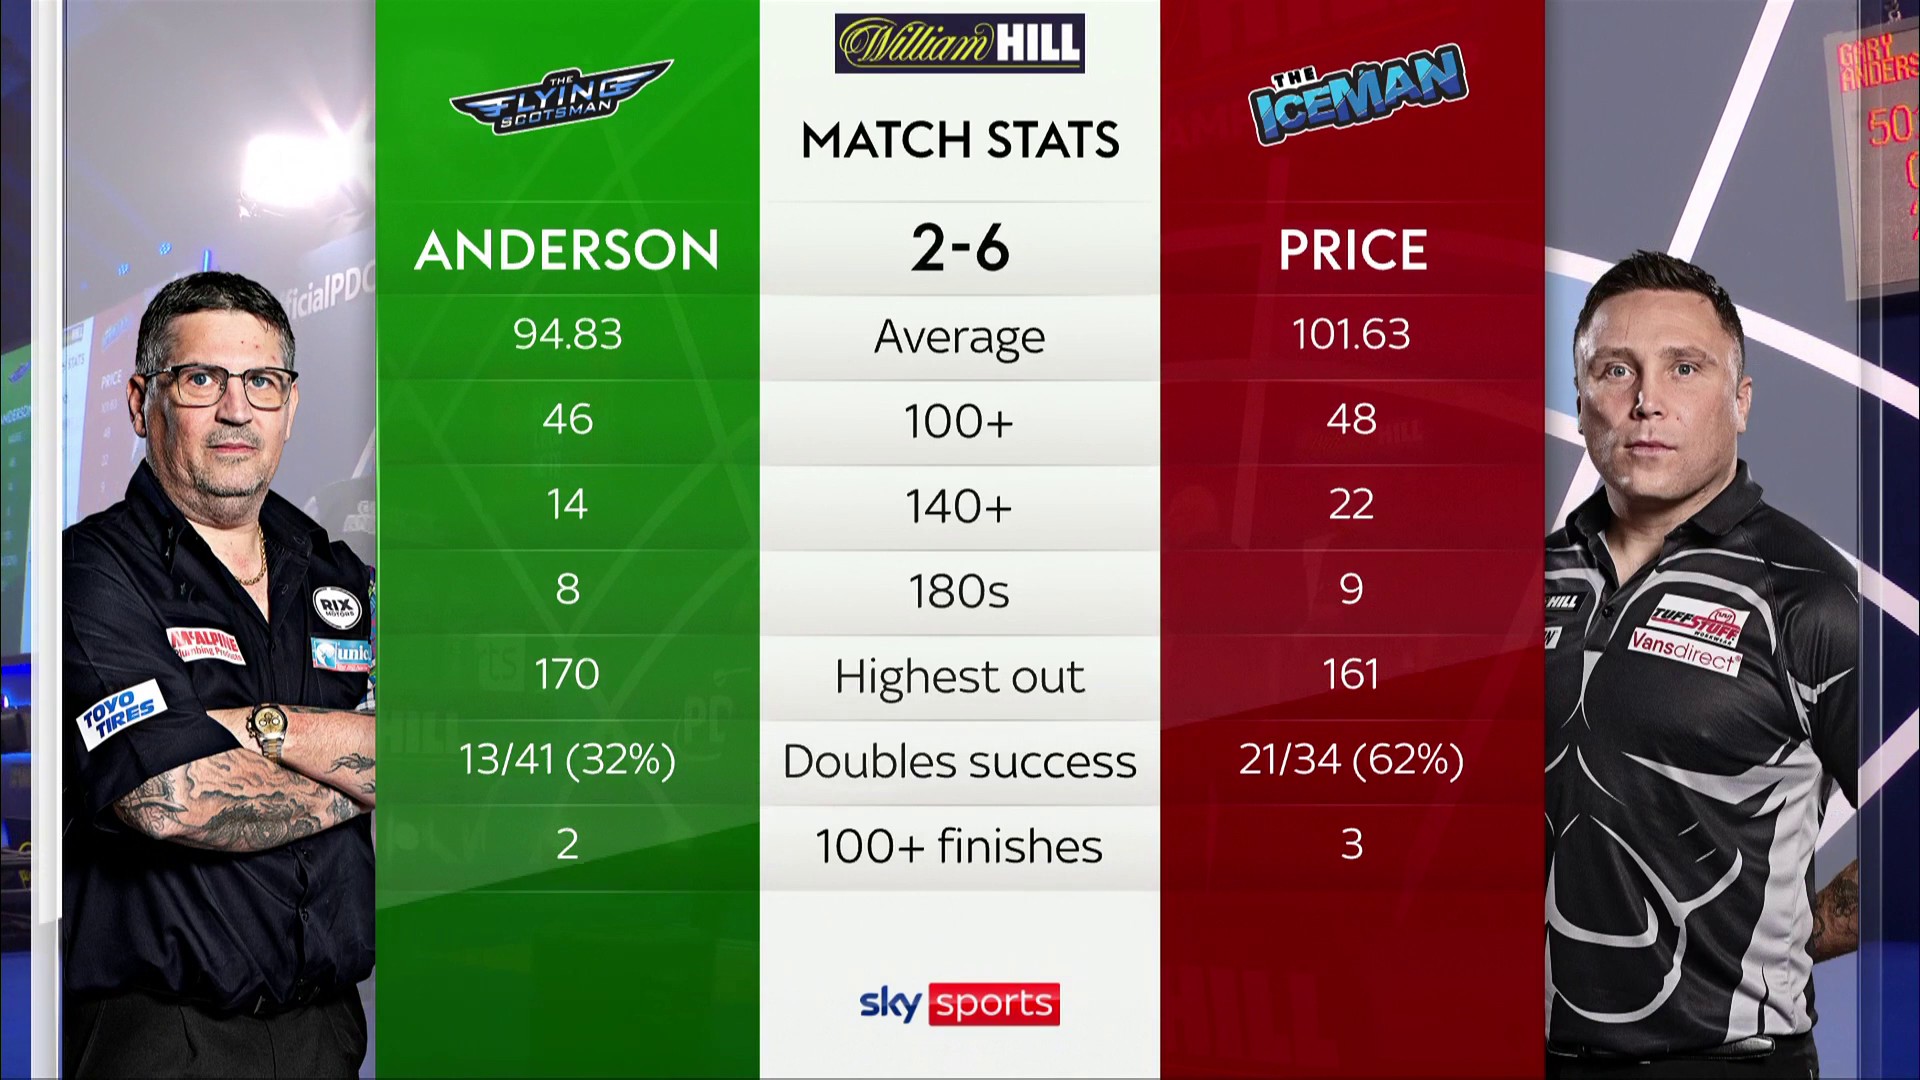 Sky Sports Darts on "Here's the tale of the tape... 📺 Sports Main Event &amp; Darts ✍️ Live blog: https://t.co/WdauodE6ap #⃣ #LoveTheDarts https://t.co/XdPQNIhv2j" / Twitter